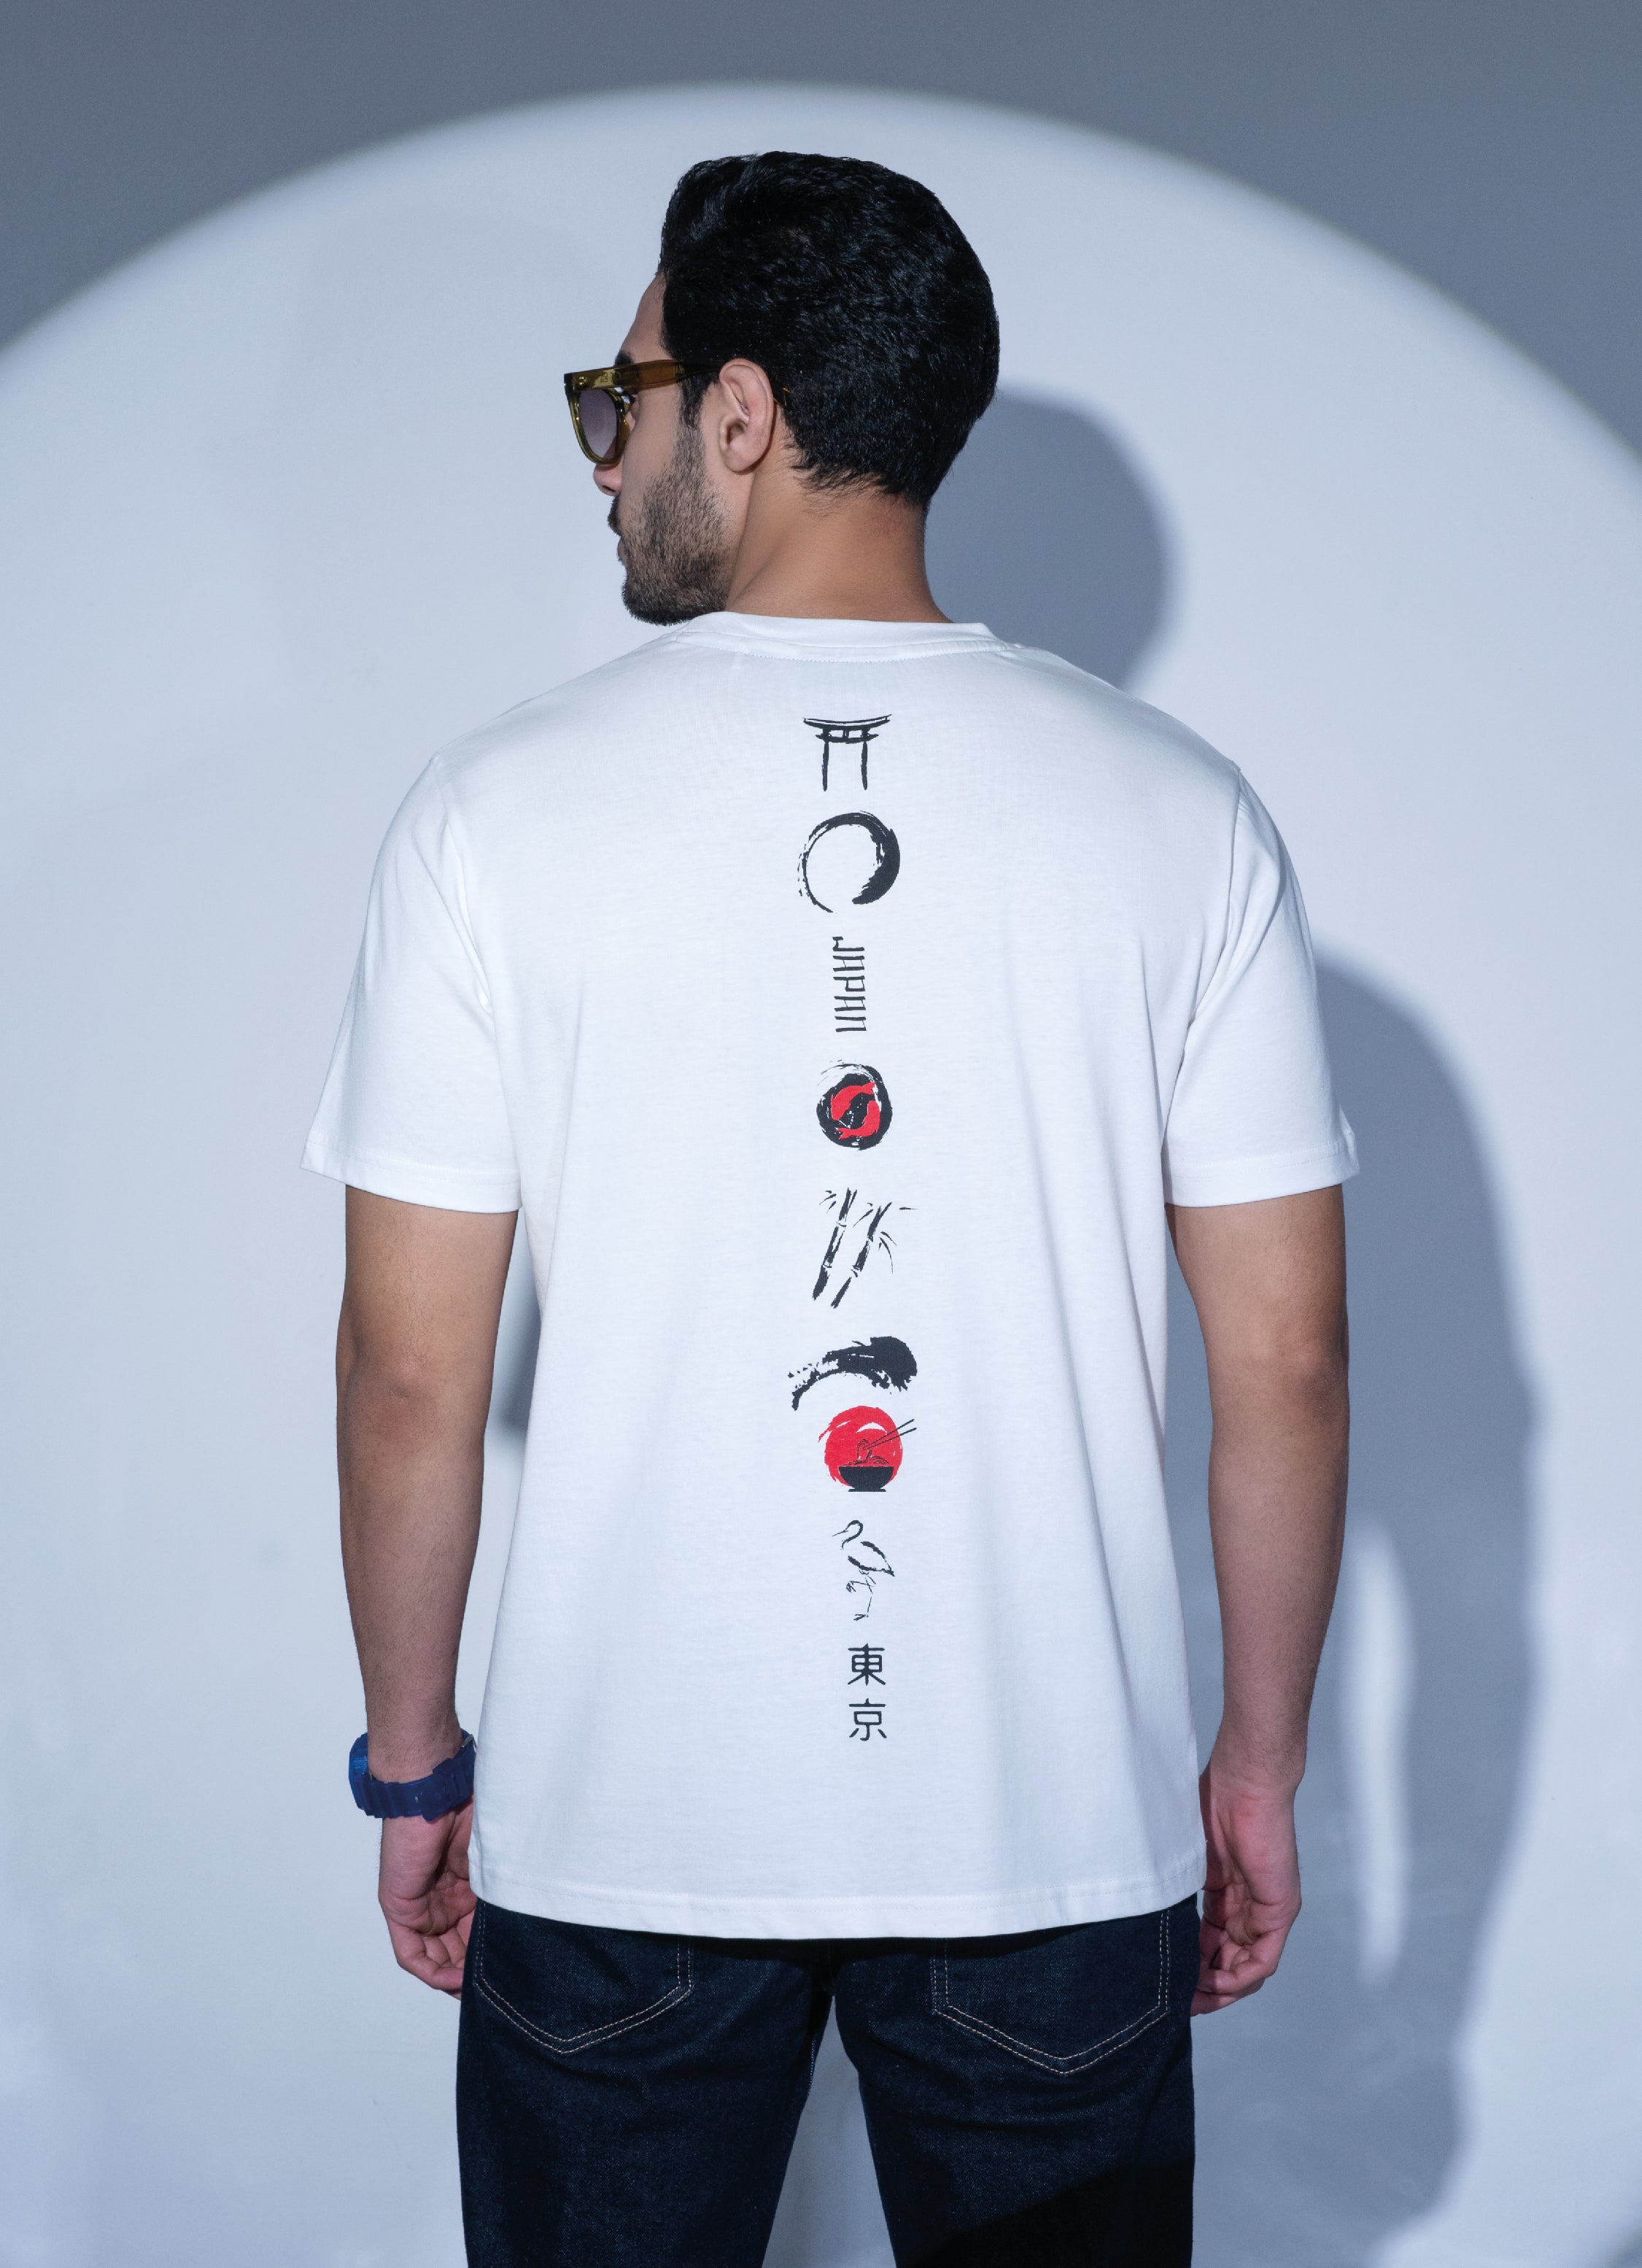 Buy The latest The 97thhour White Tokyo T-shirt back look at Best price 